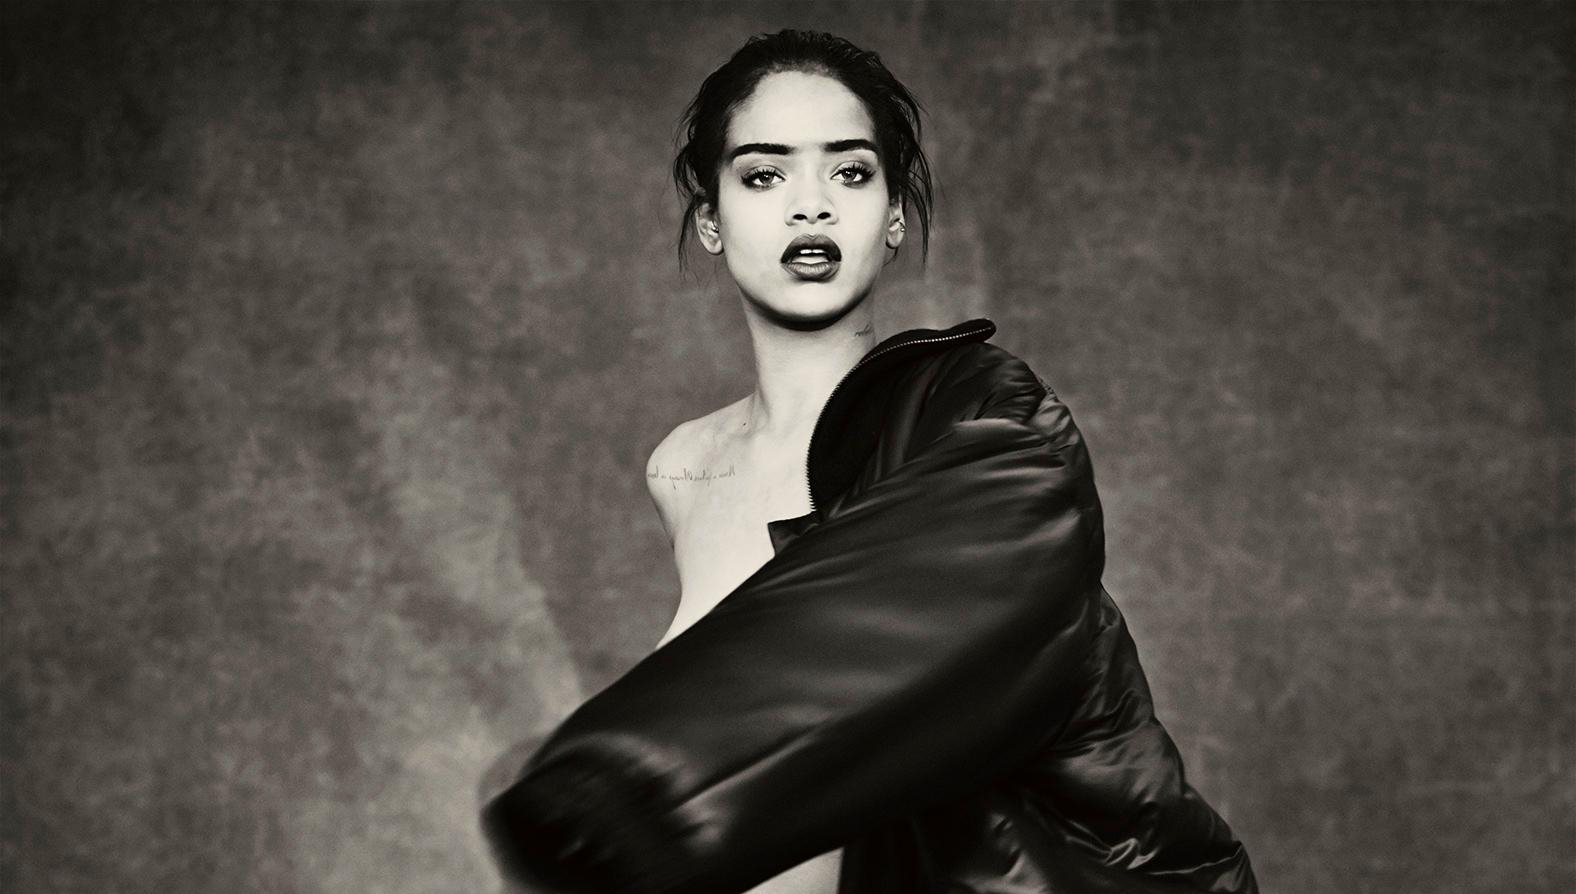 Rihanna breaks own record for most Top 10 radio songs